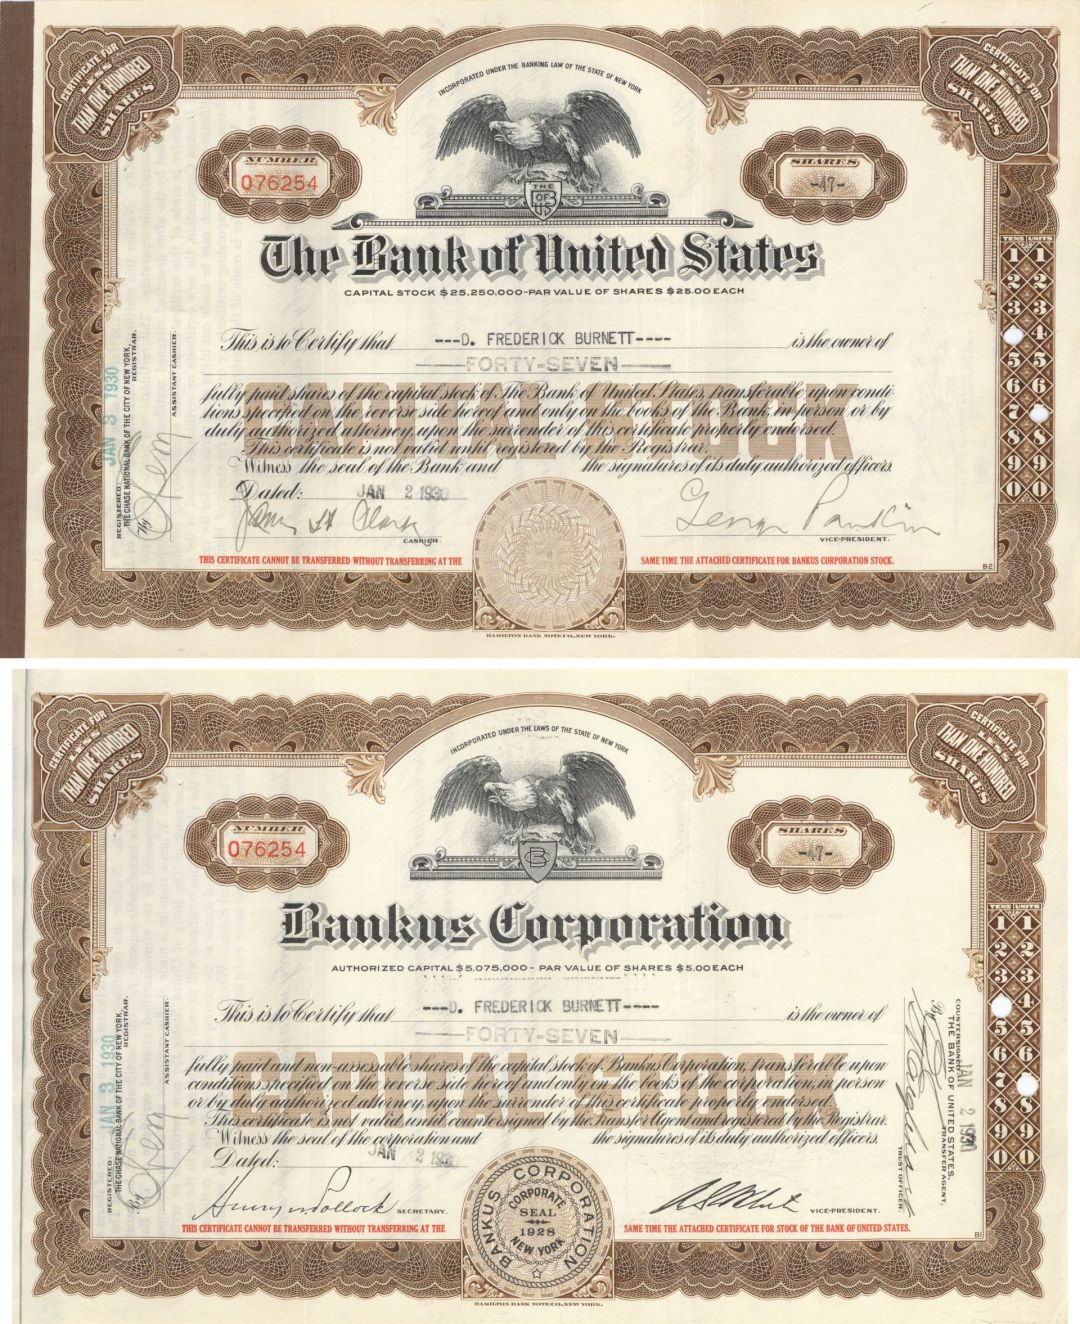 Bank of United States & Bankus Corporation - 1920's-30's dated Dual Stock Certificates - Quite Rare Format